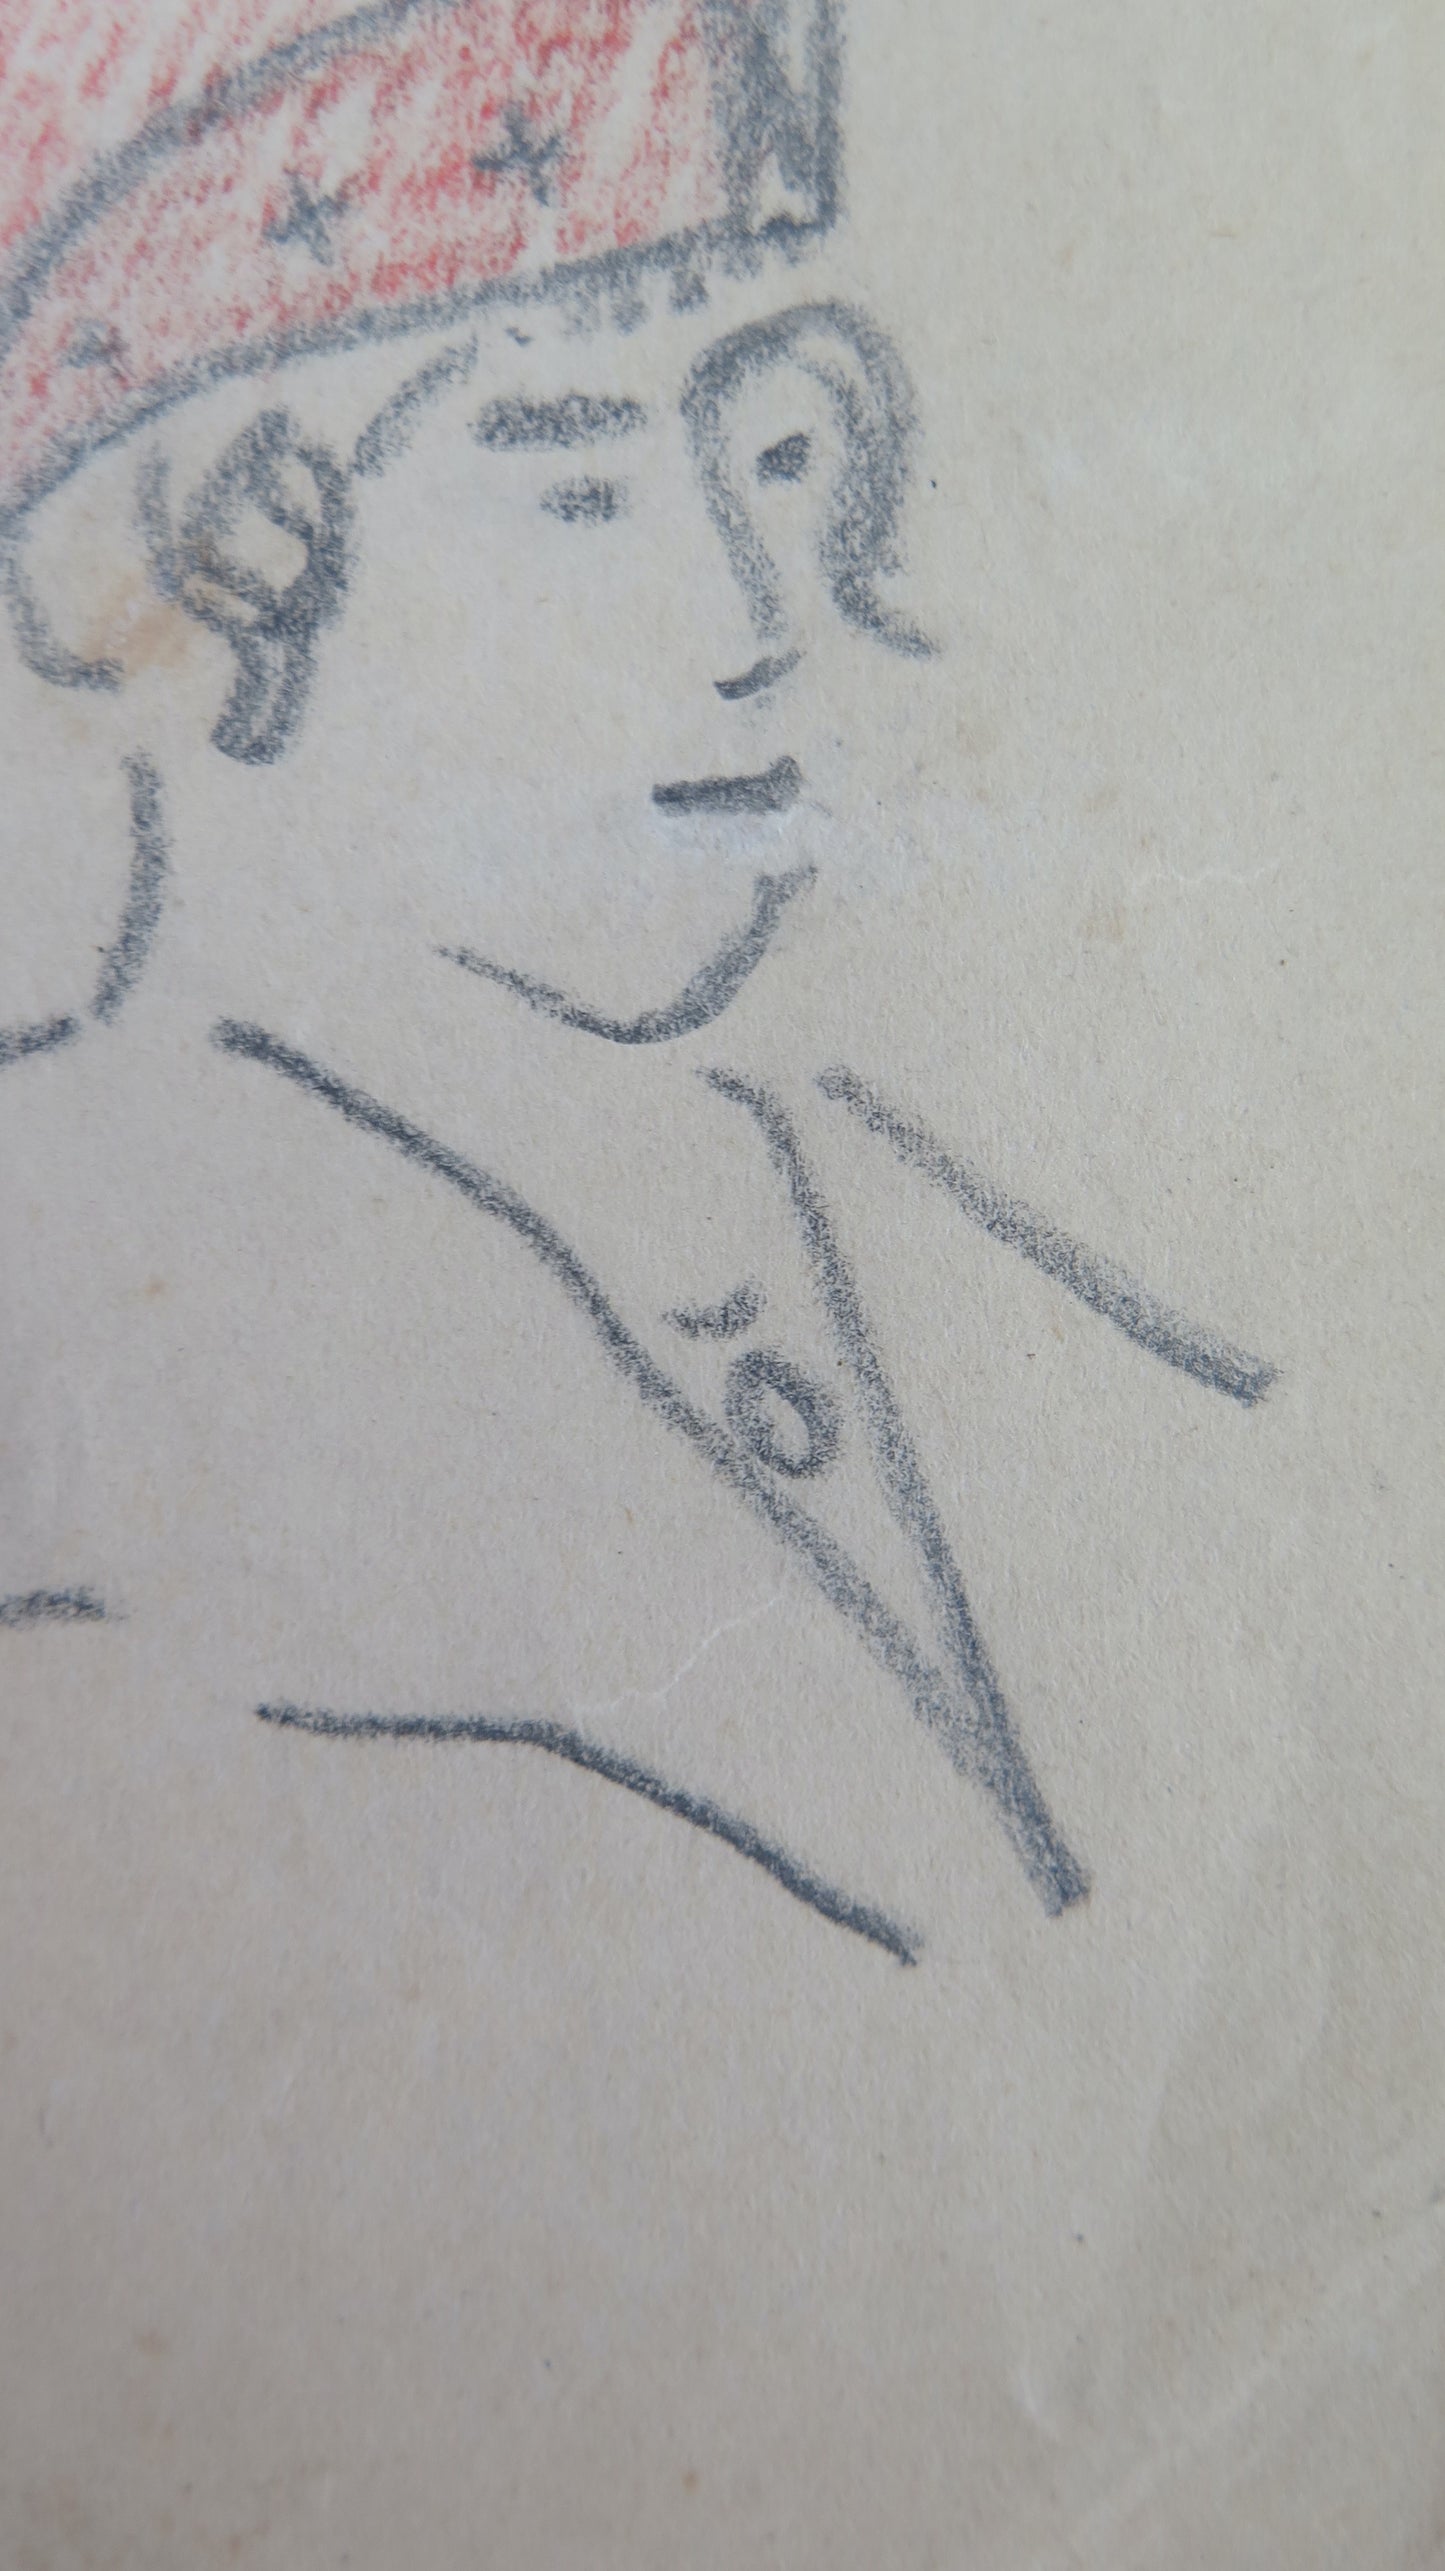 ANTIQUE DRAWING SKETCH PORTRAIT OF AN ELEGANT LADY FROM THE EARLY 1900s BM53.5F